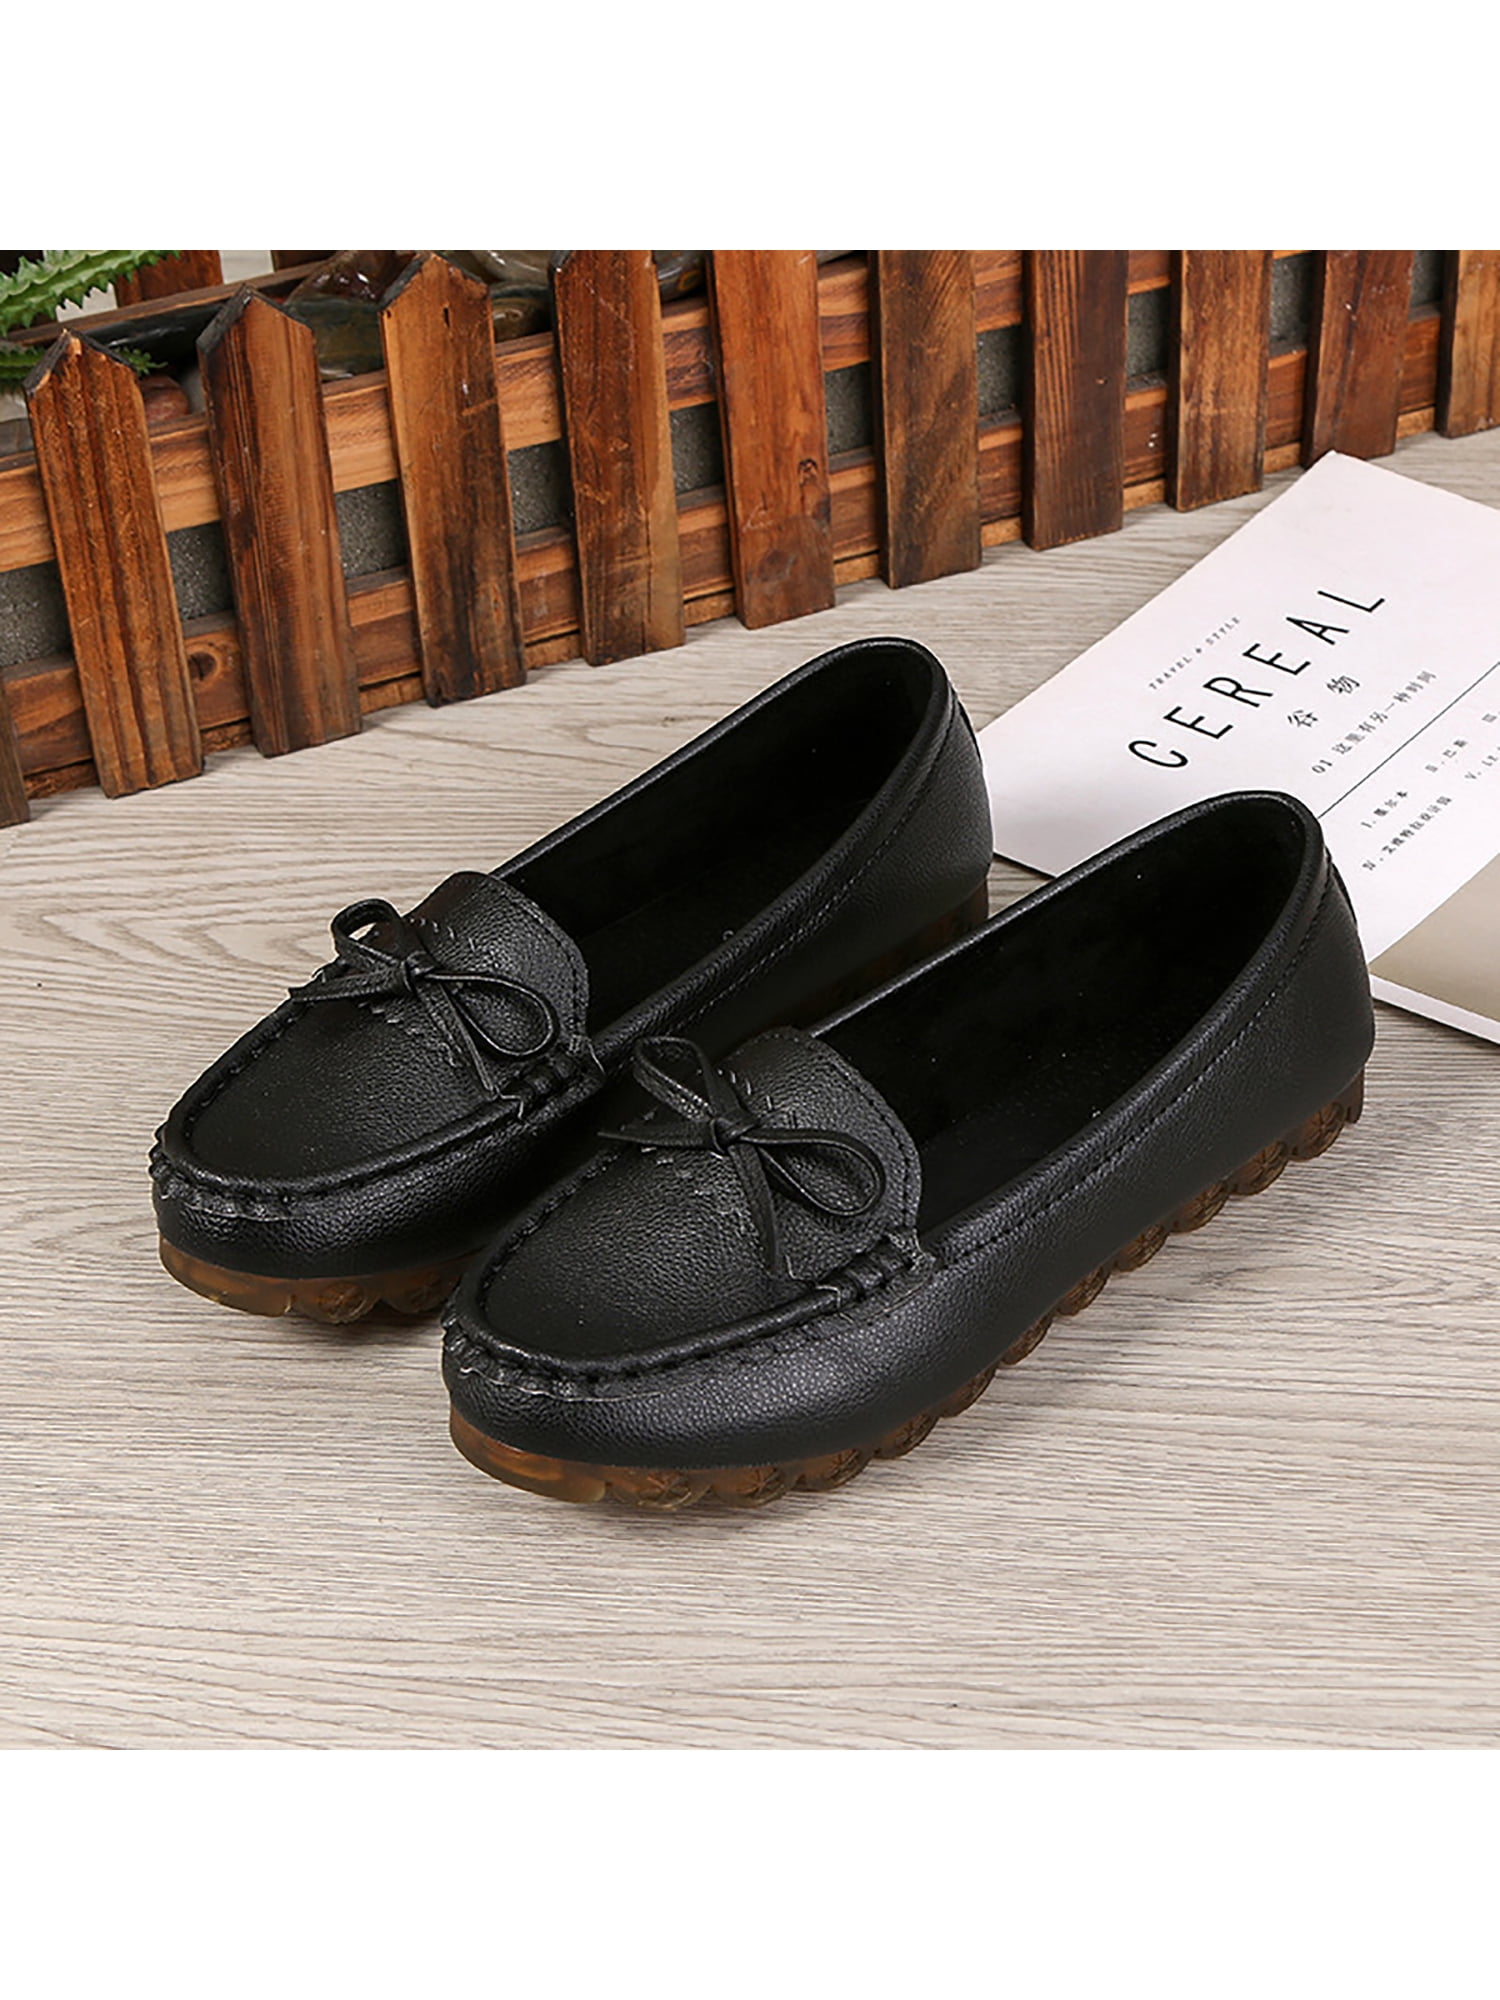 Womens Bow Penny Single Shoes Comfy Low Heel Shallow Pointed Toe PU Leather Loafers Casual Retro Slip On Office Work Shoes 